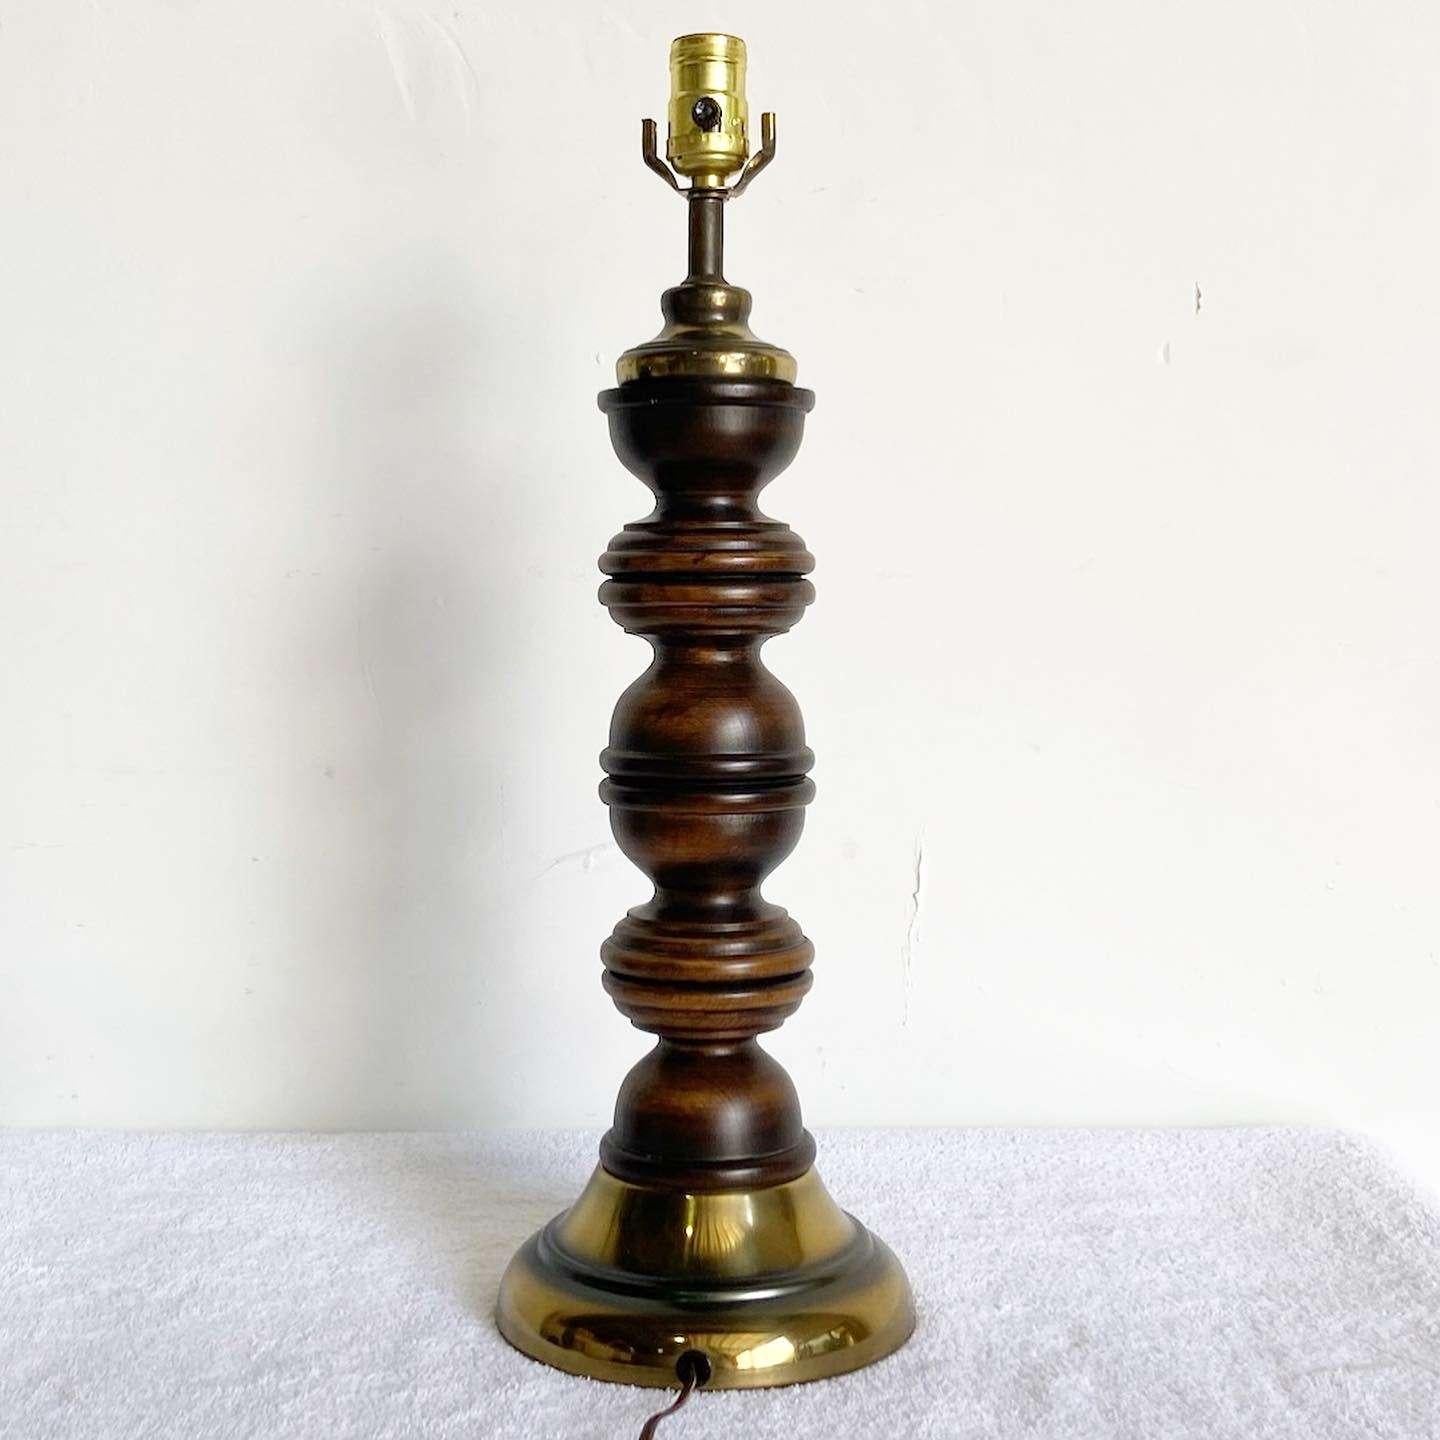 Wonderful vintage mid century modern pepper grinder table lamps. Features a sculpted wood body on a brass base.
